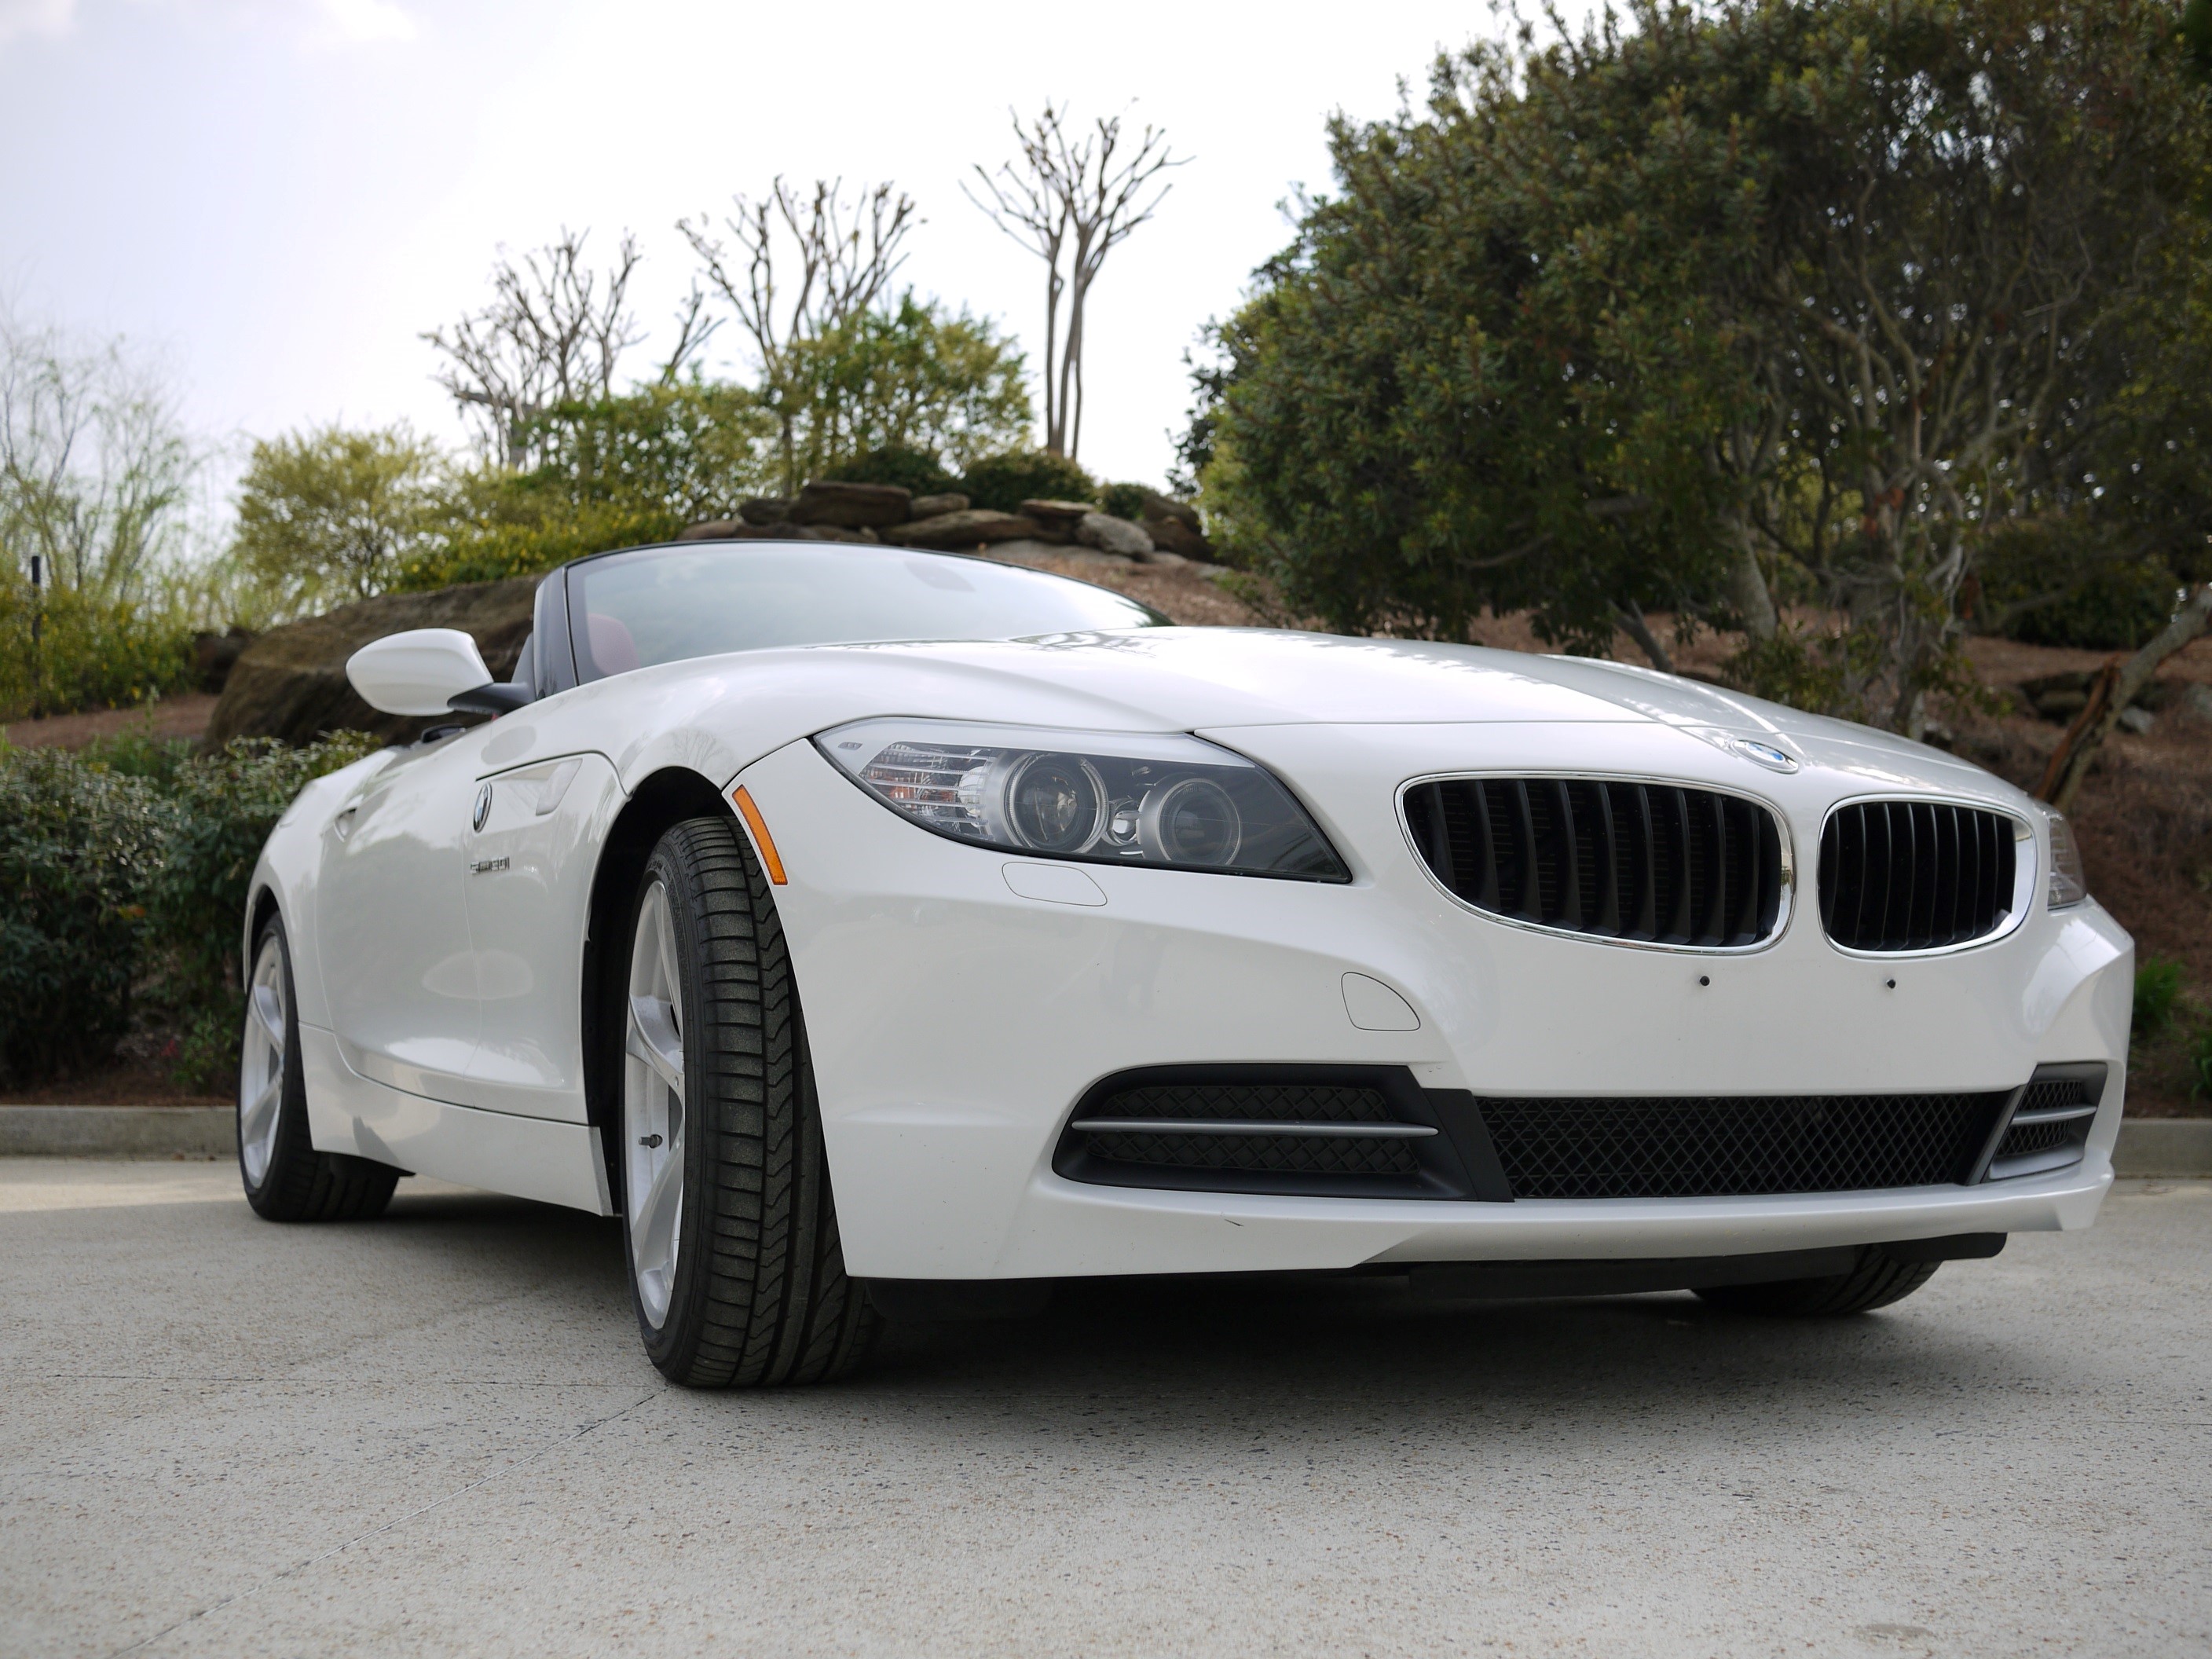 New White E89 Bmw Z4 Sporty And Topless Car Wallpapers - Bmw Car Photos Download - HD Wallpaper 